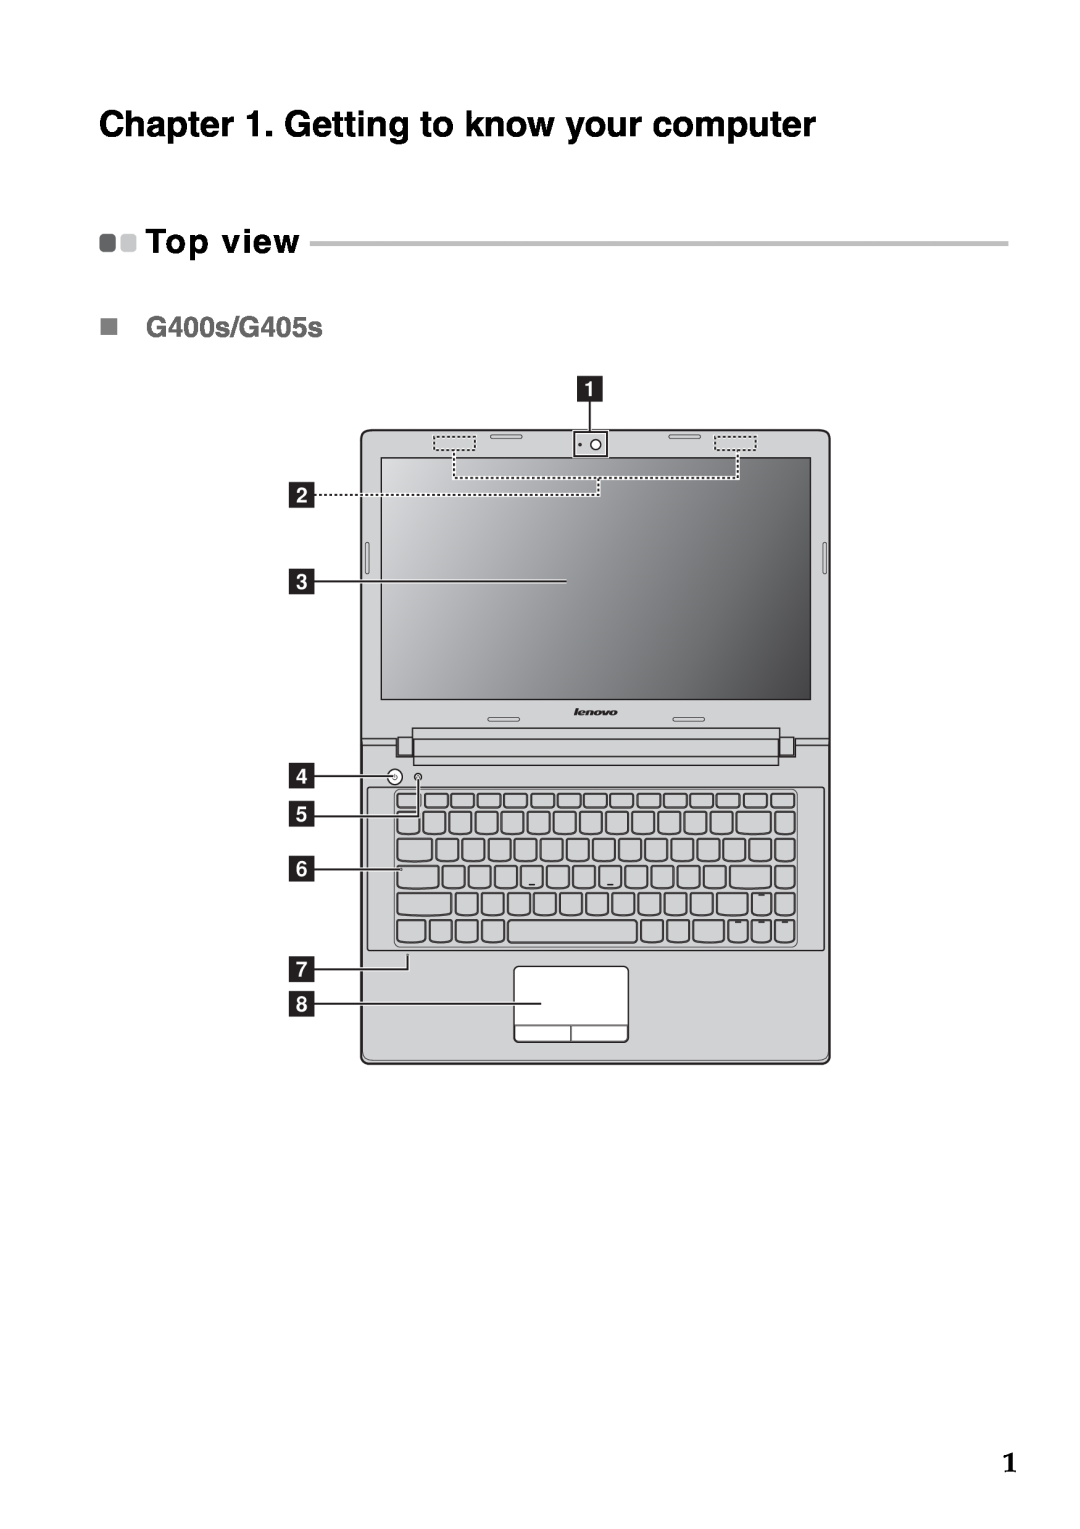 Lenovo 59373026, 59373006 manual Getting to know your computer, G400s/G405s, Top view 